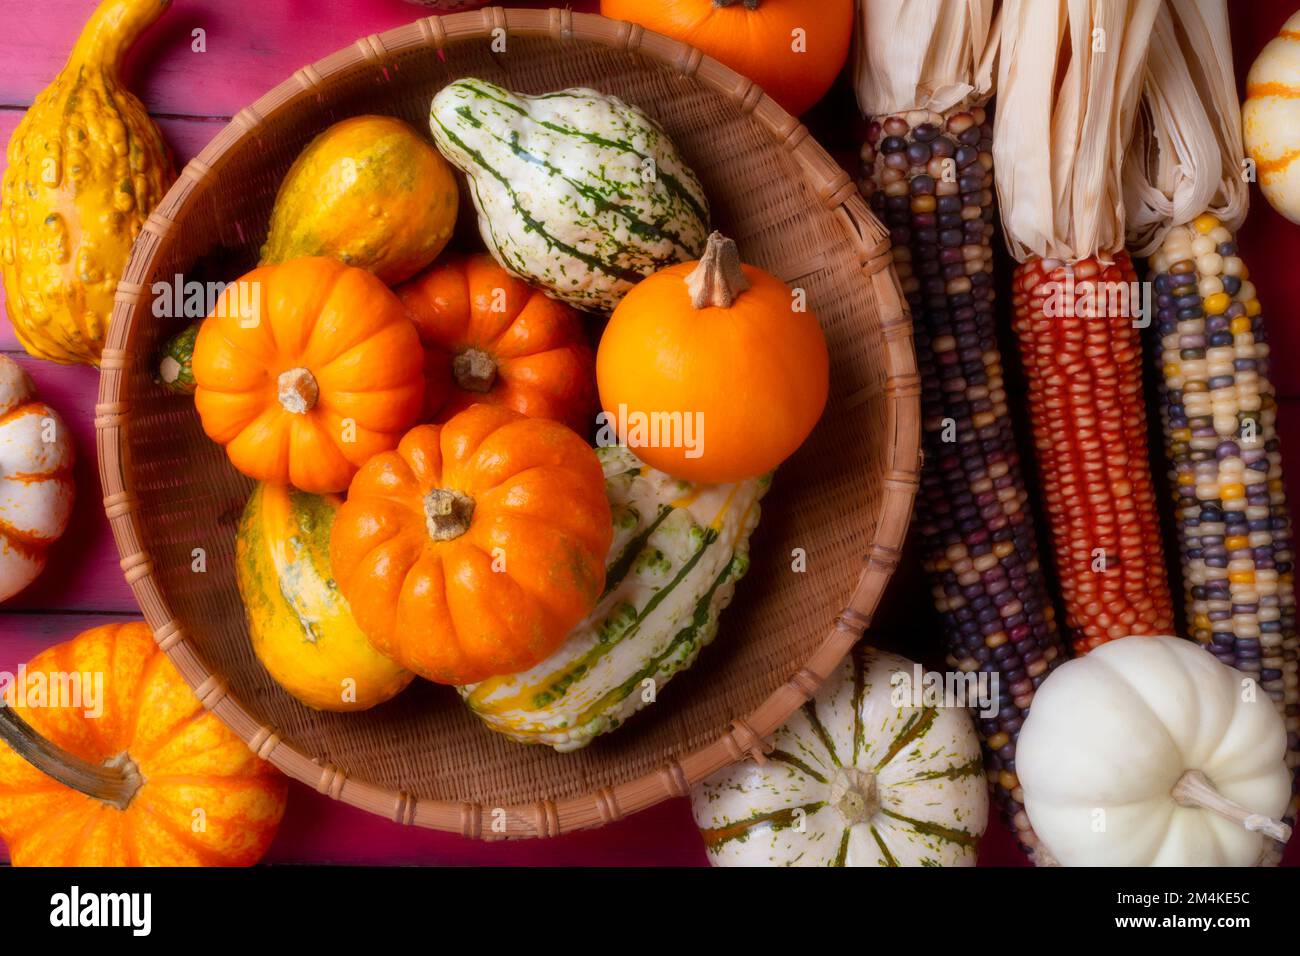 Wonderful Basket Full Of Small Pumpkins And Gourds Still life Stock Photo